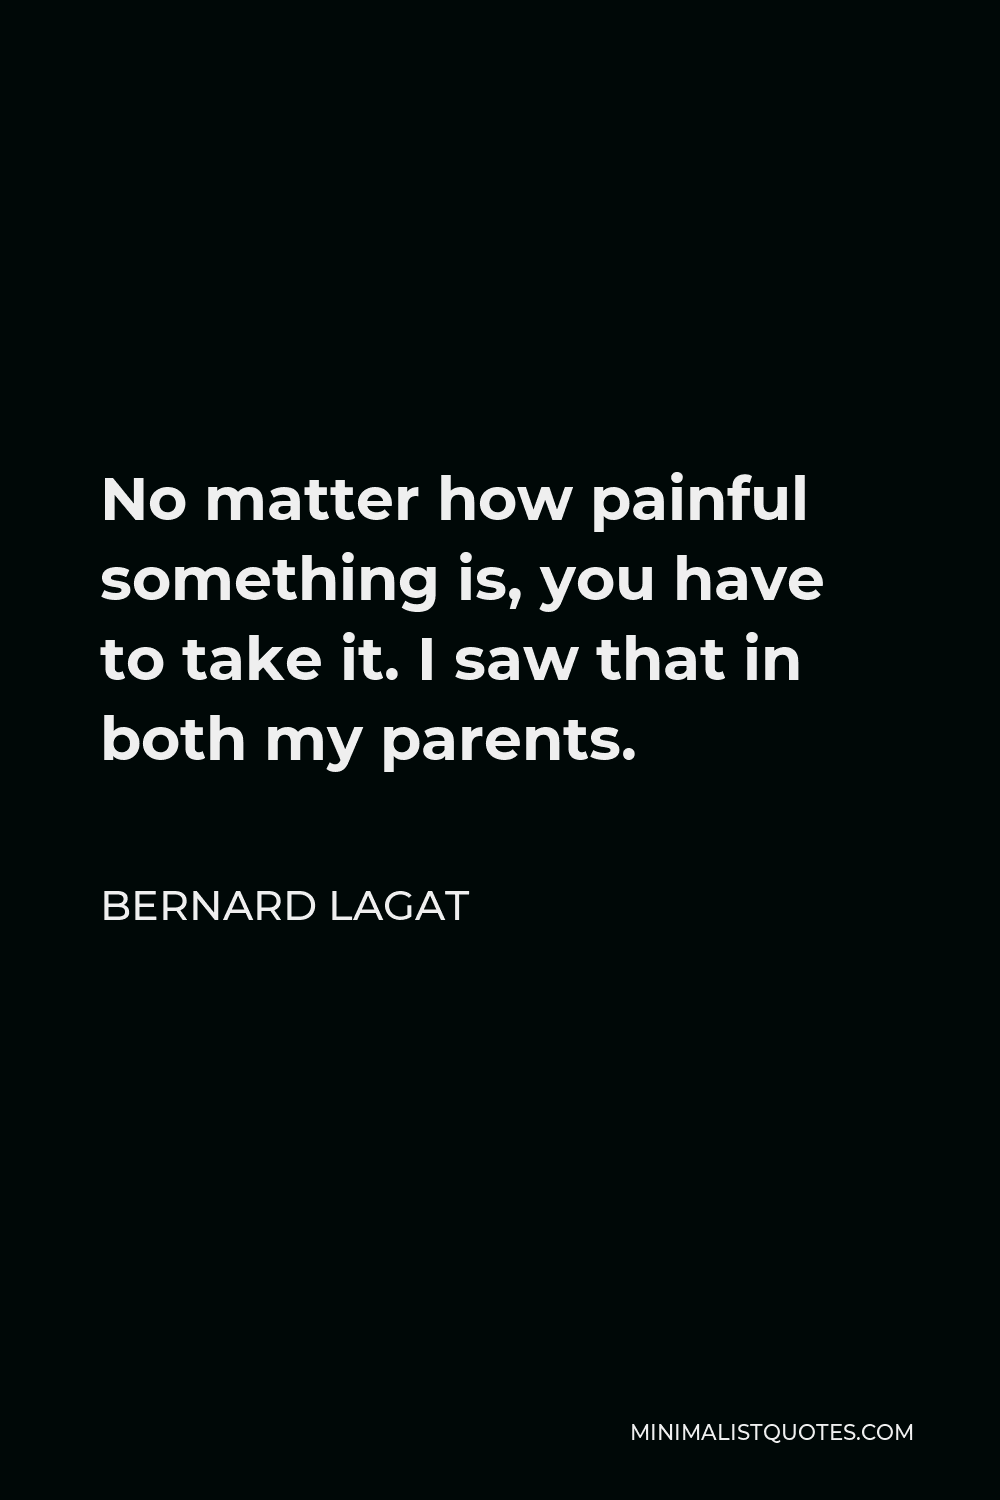 Bernard Lagat Quote - No matter how painful something is, you have to take it. I saw that in both my parents.